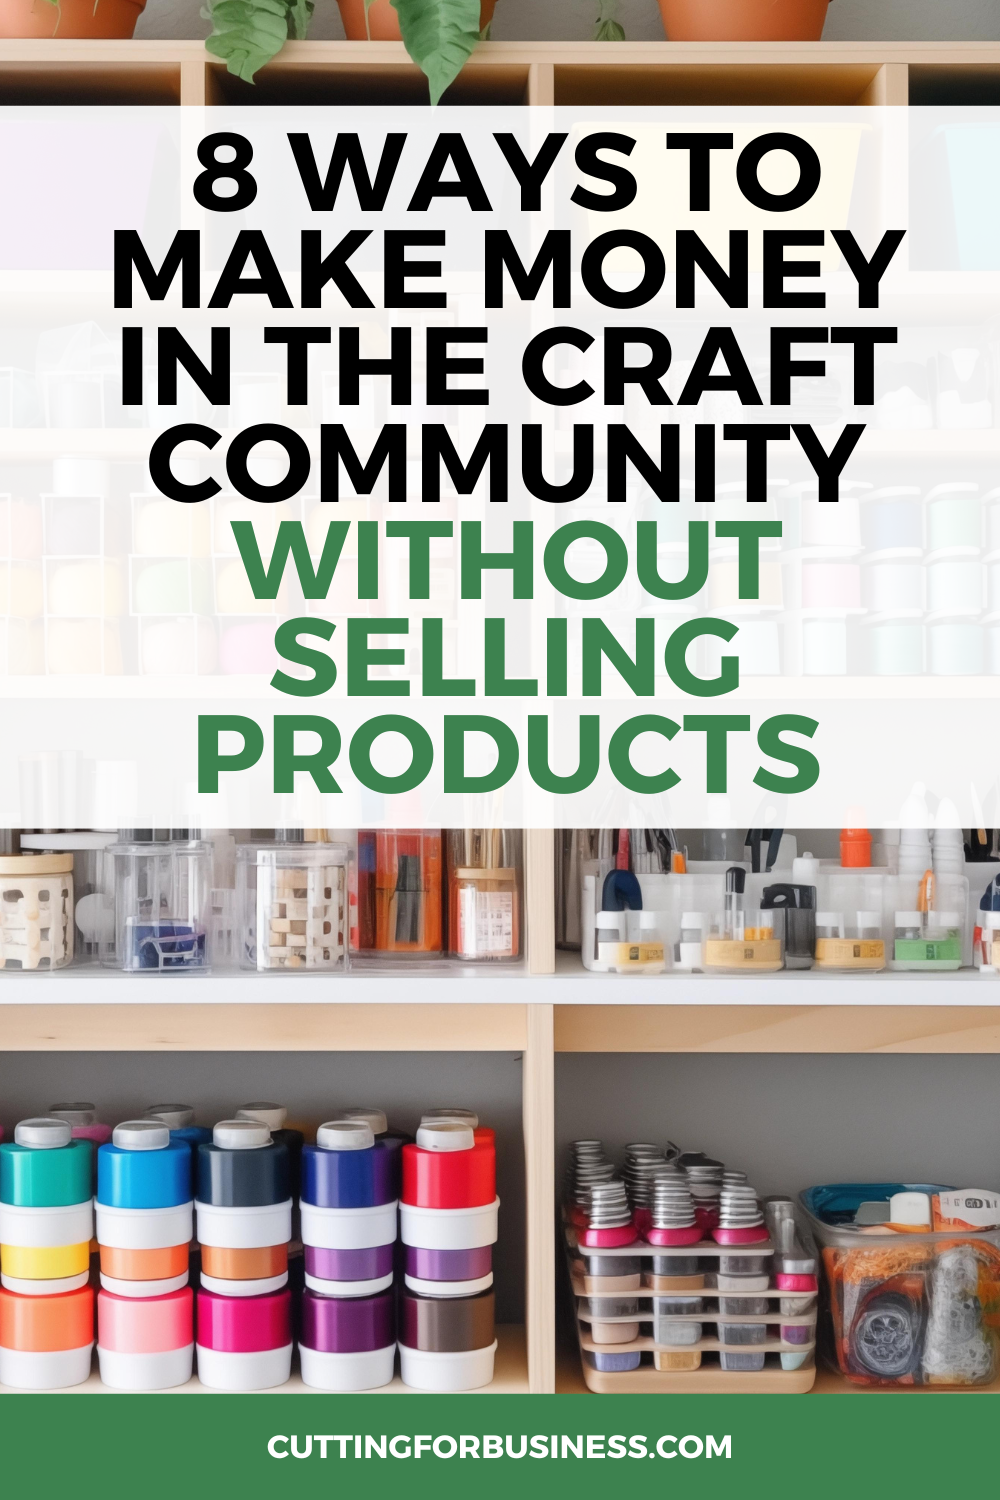 8 Ways to Make Money in the Craft Community without Selling Products - cuttingforbusiness.com